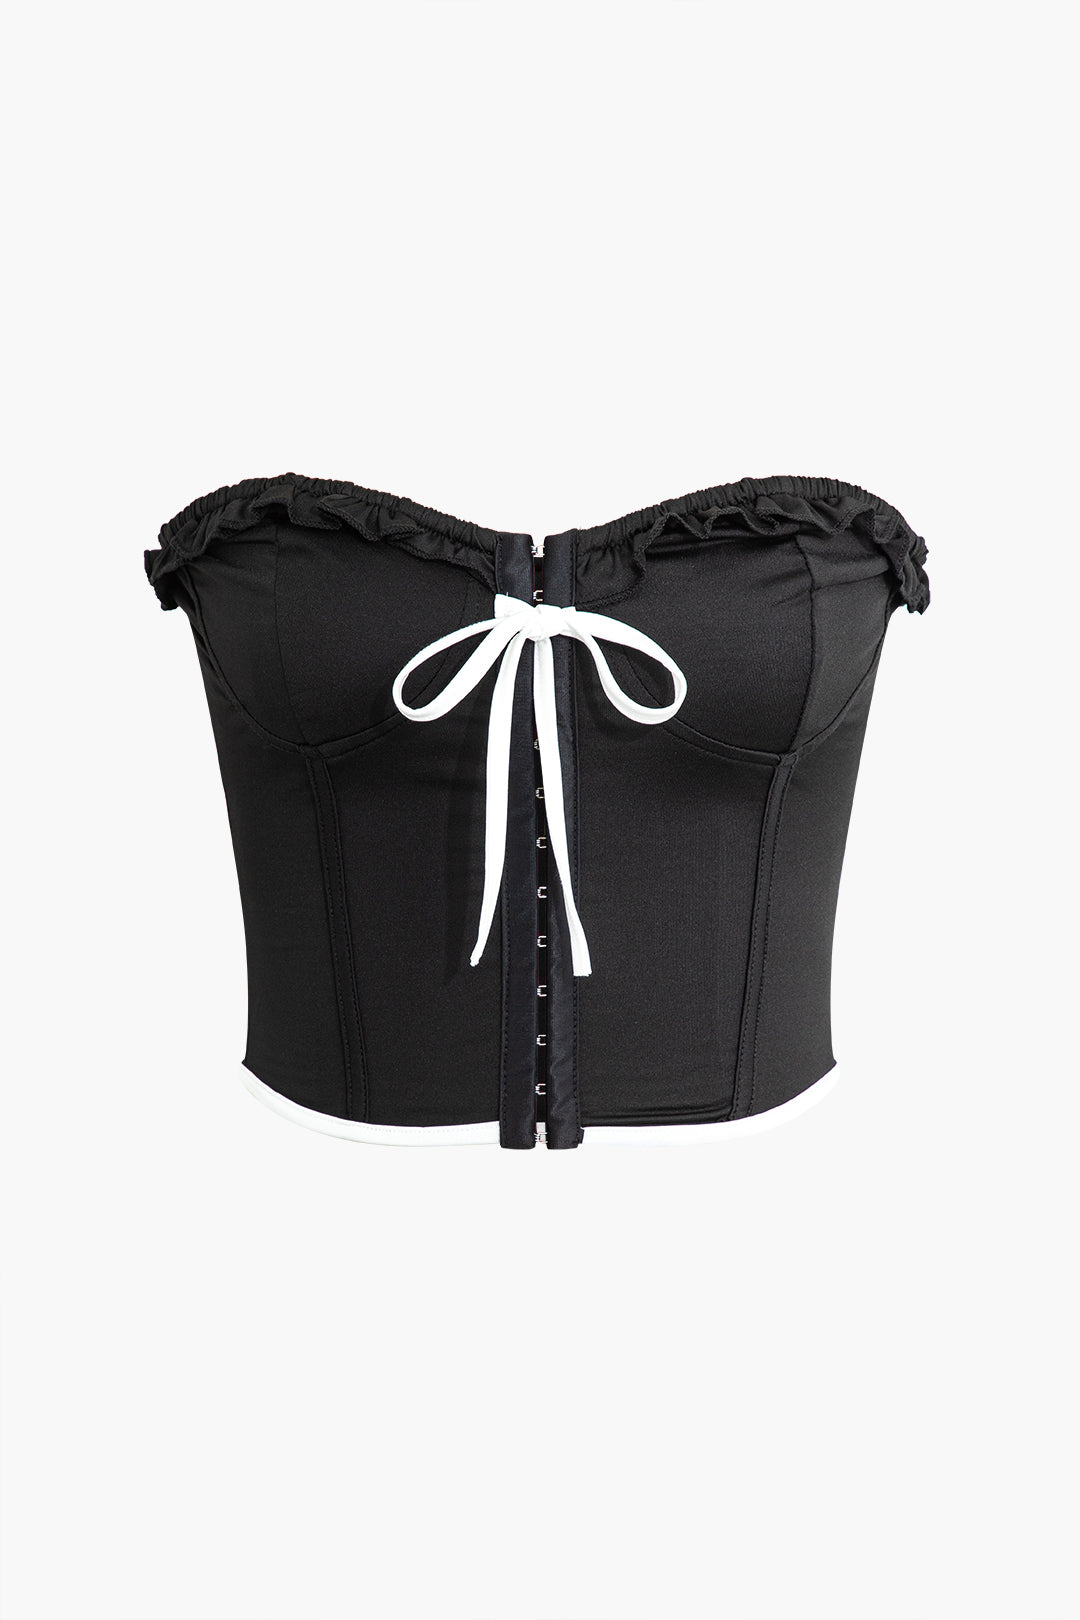 Lace Up Ruffle Bustier Corset Top